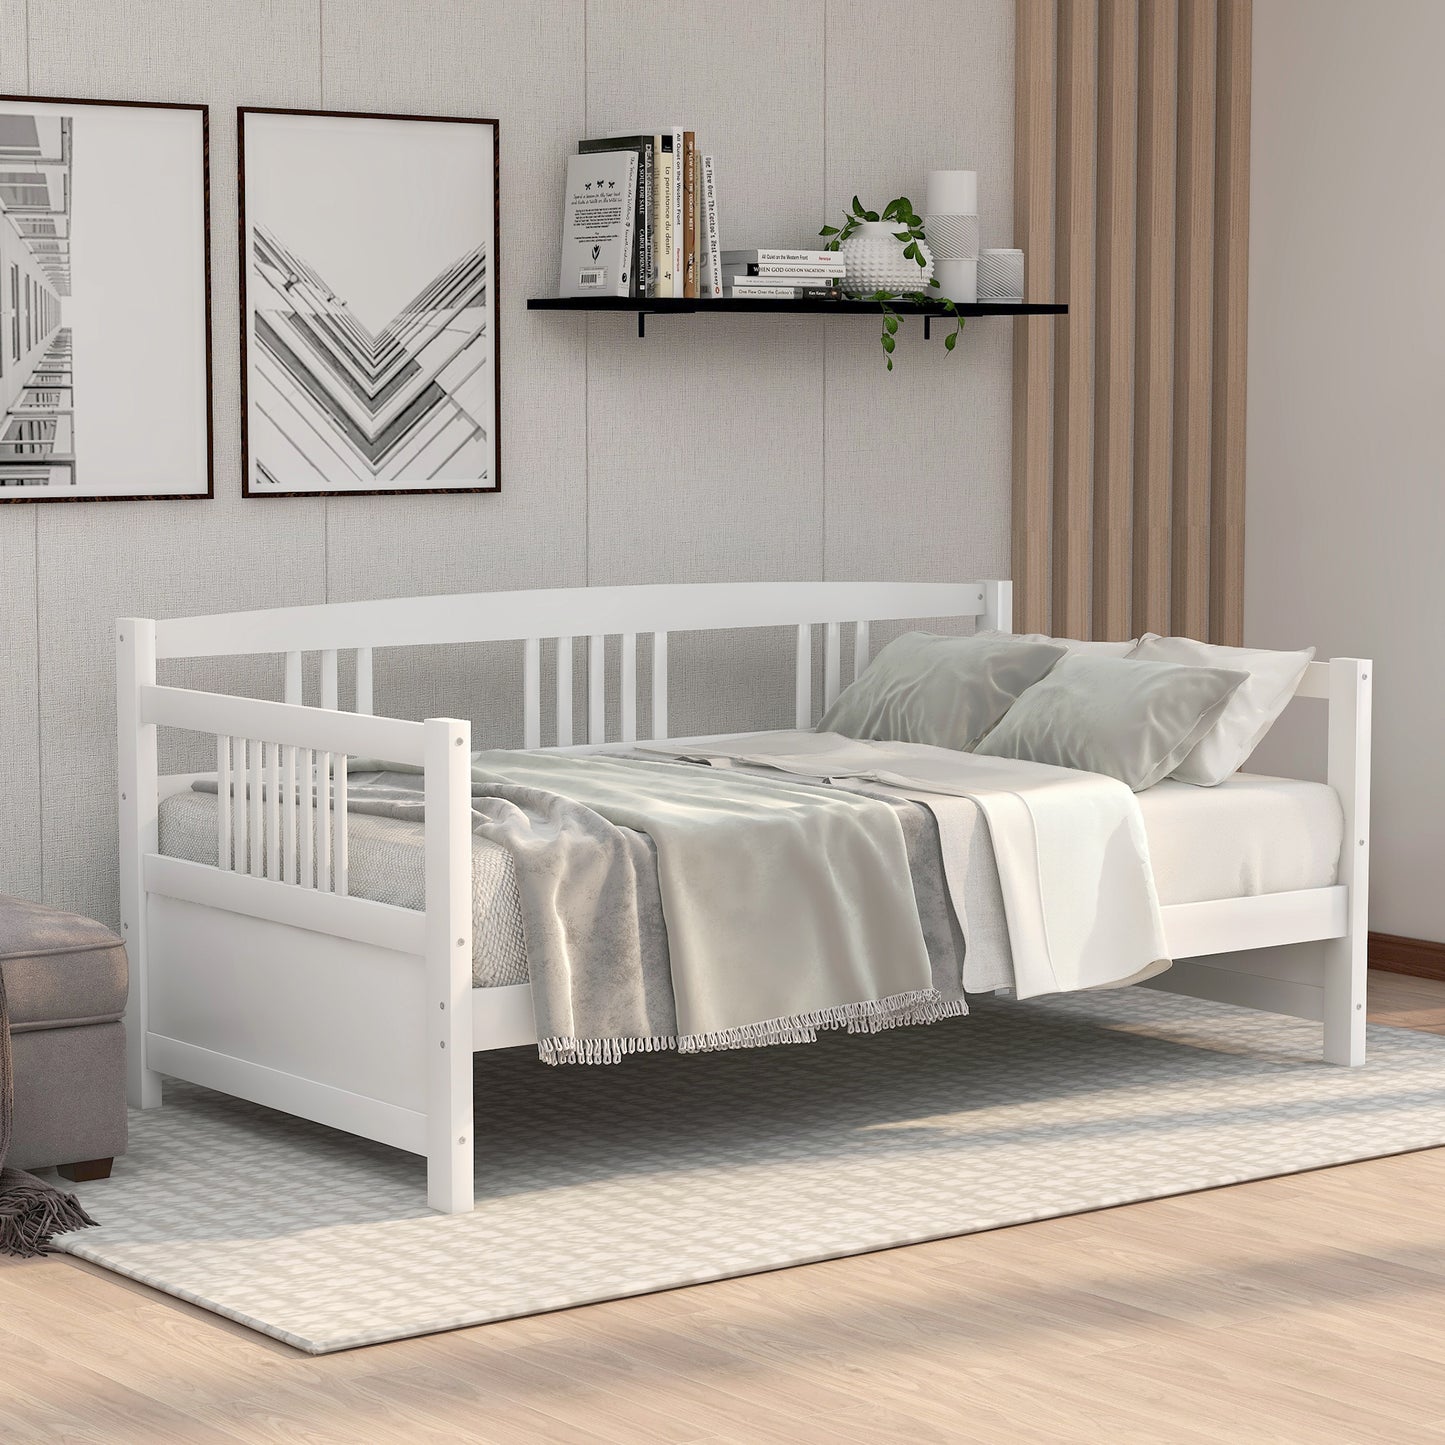 Modern Solid Wood Daybed, Multifunctional, Twin Size, White (Previous SKU: WF191899AAK)